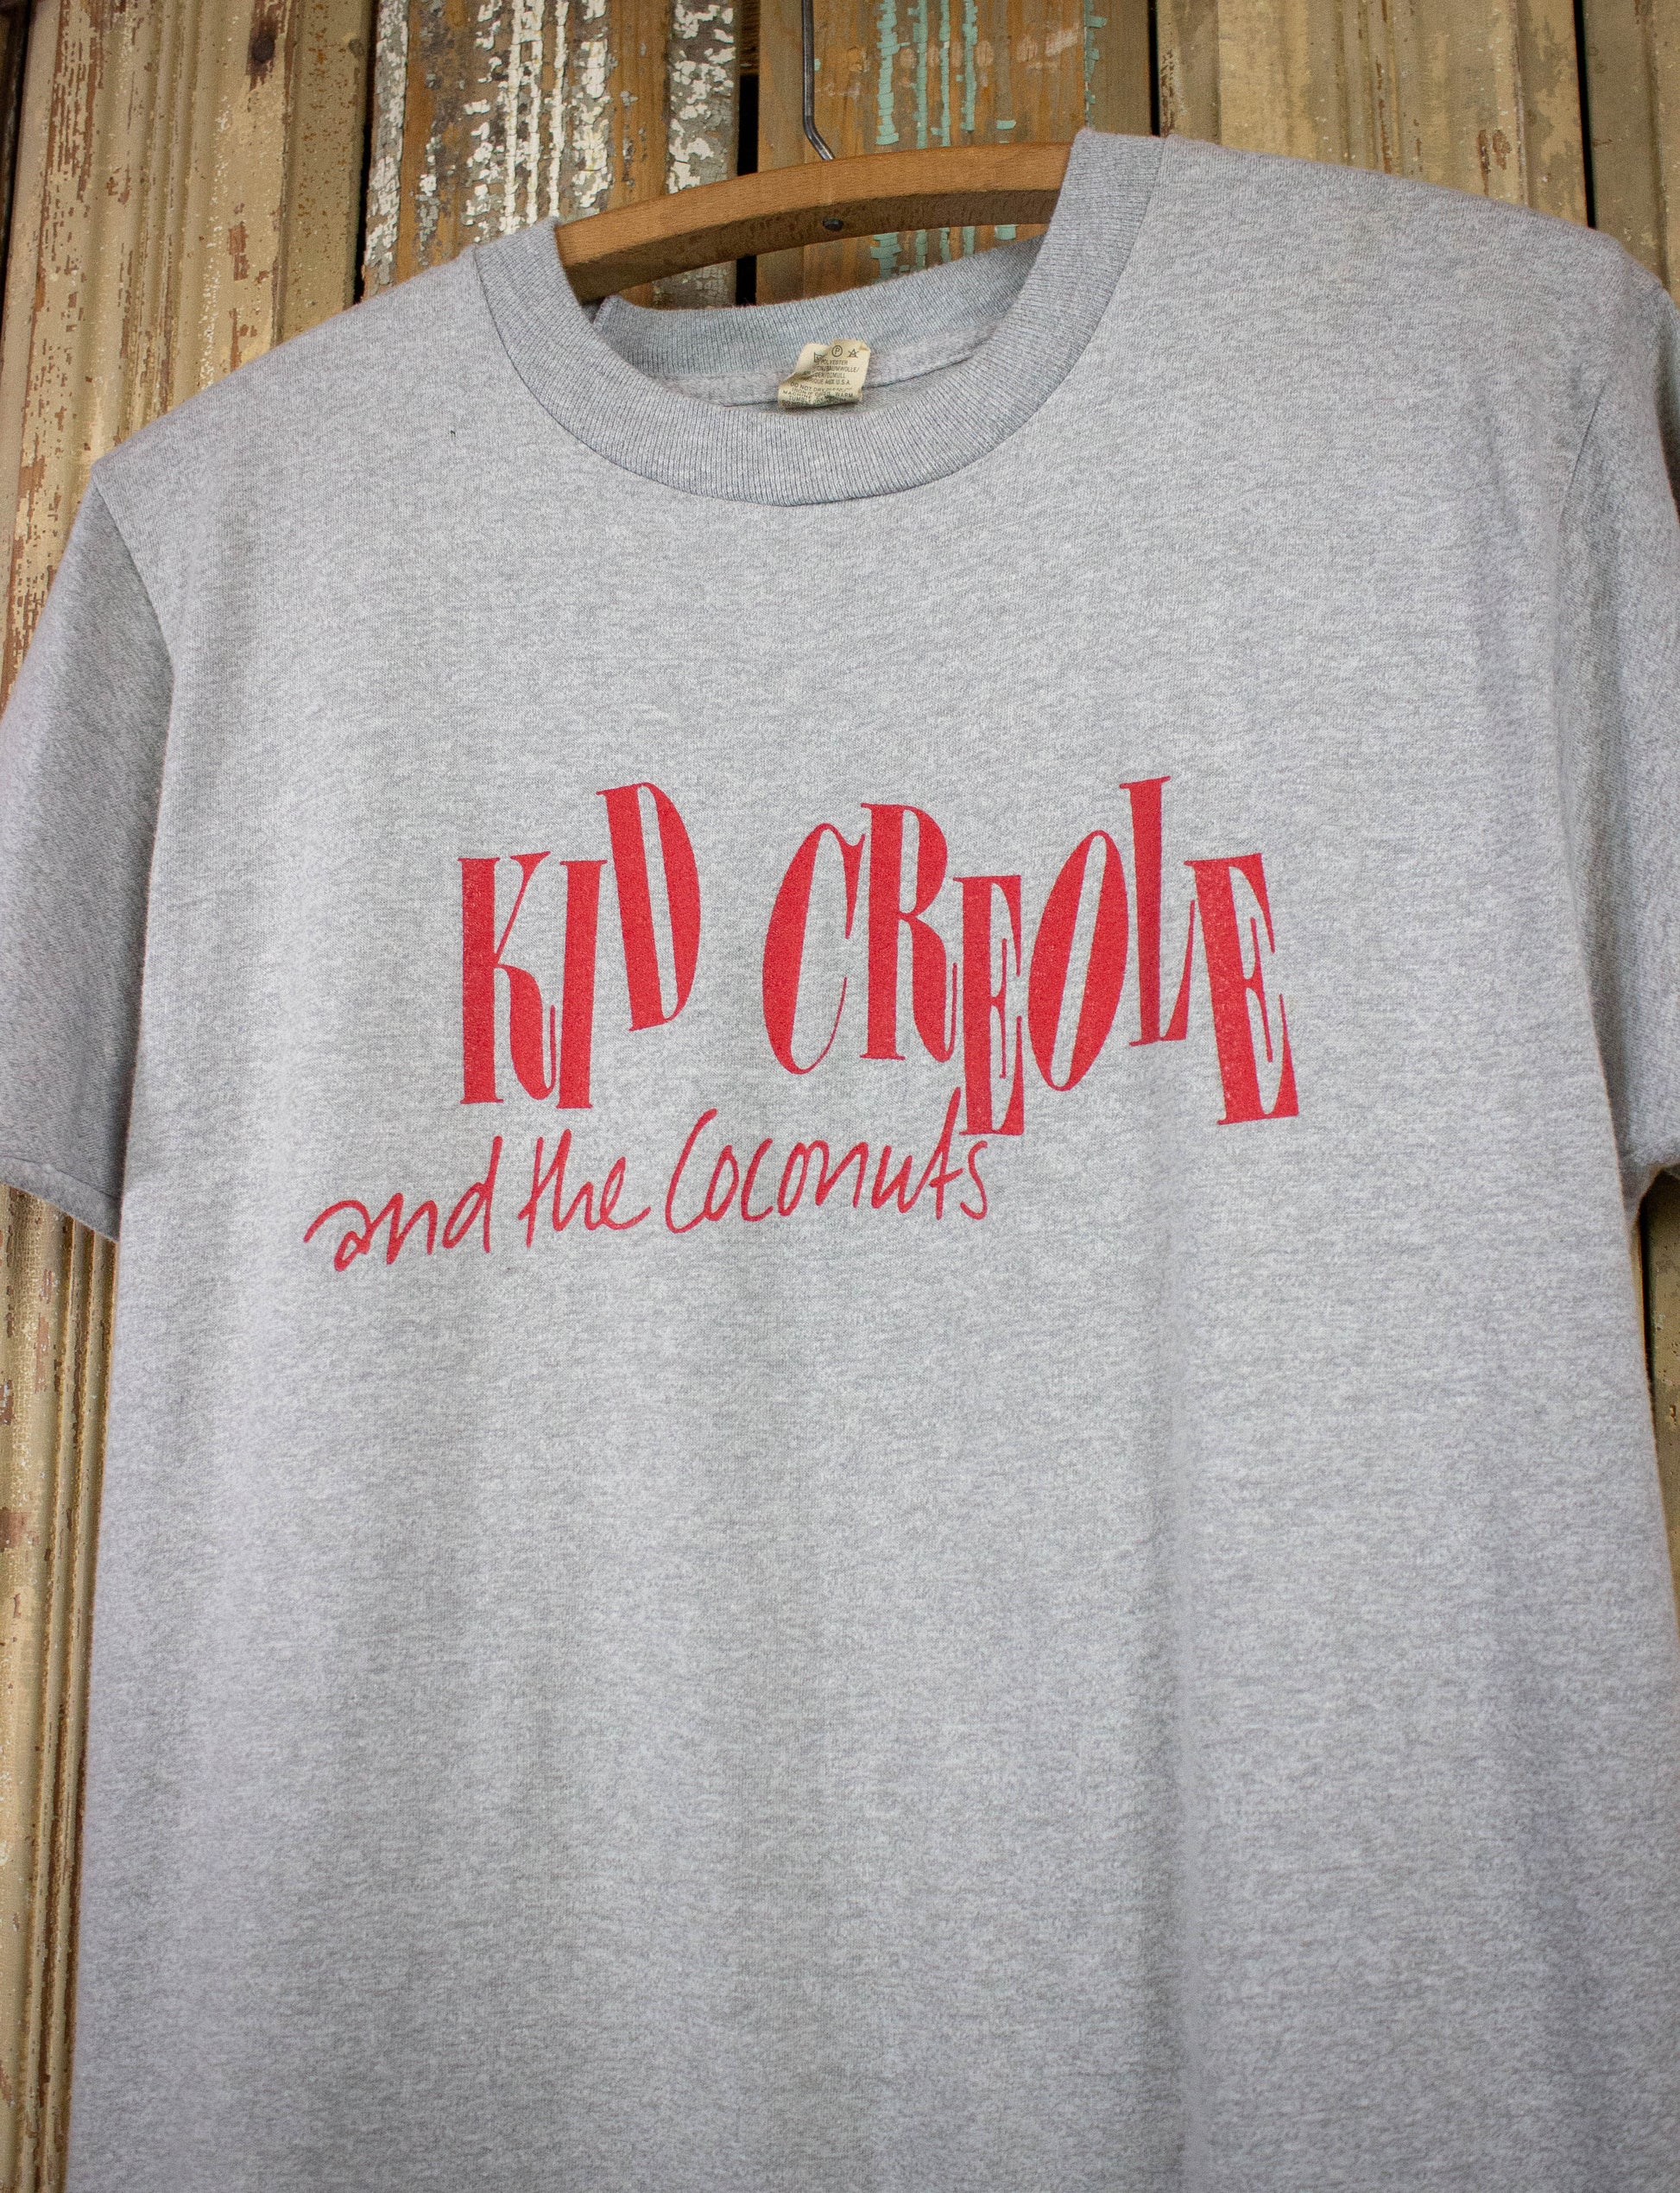 Vintage Kid Creole and the Coconuts Concert T Shirt 80s Gray Medium